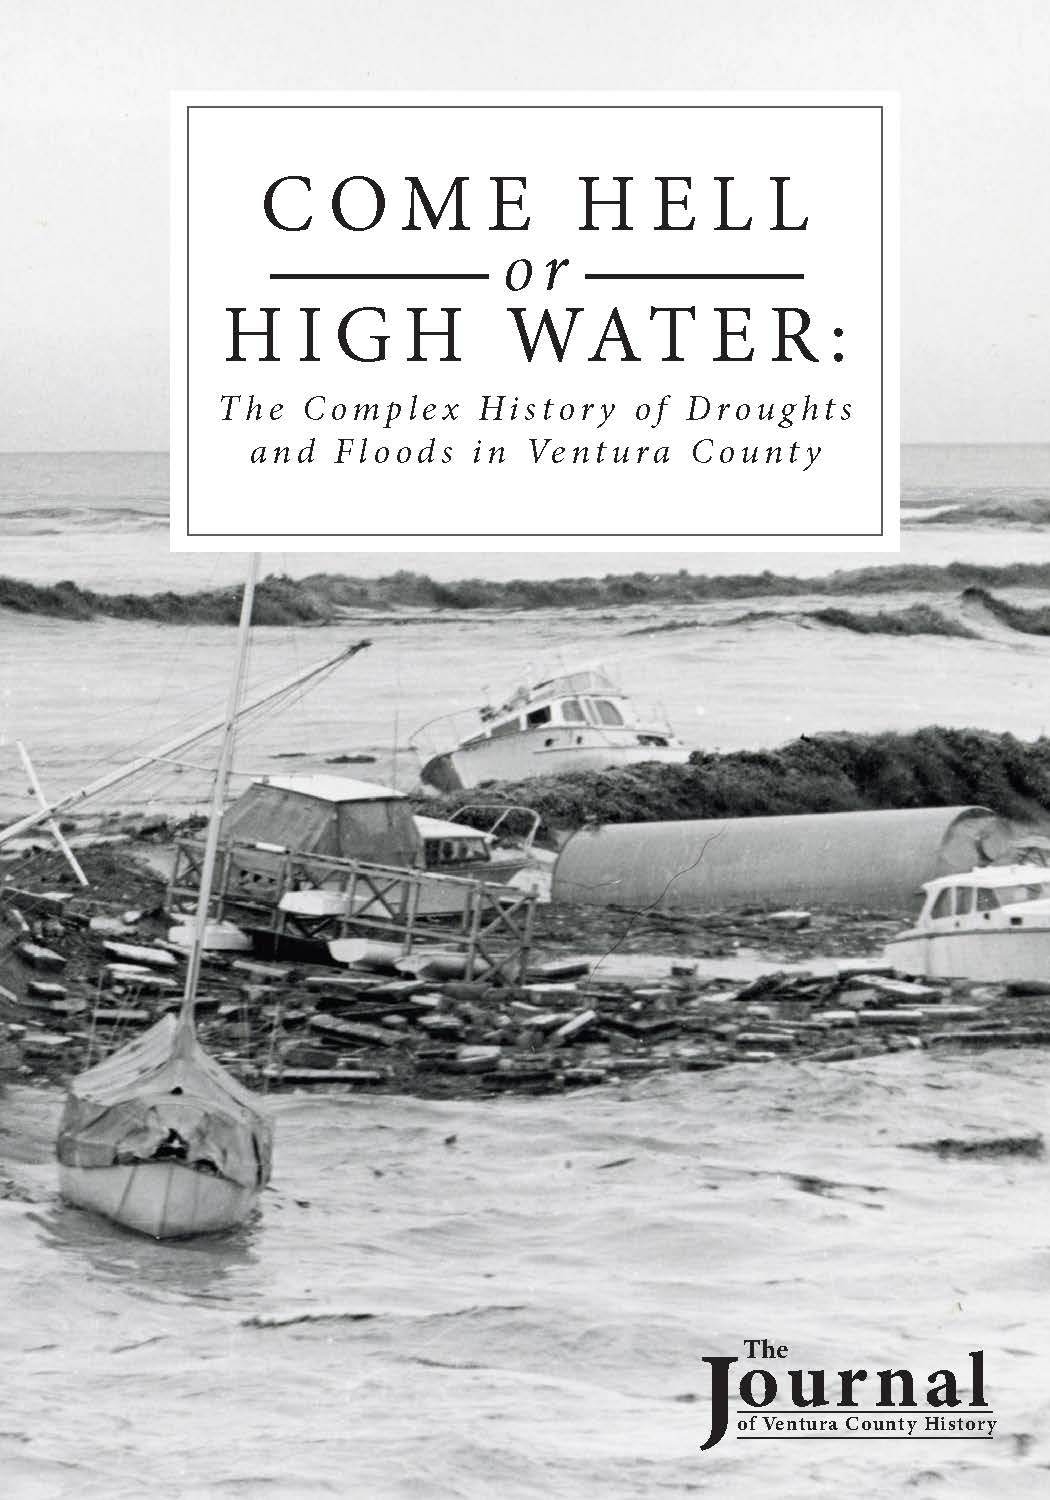 Journal of Ventura County, Vol 64 Number 1 – Come Hell or High Water cover